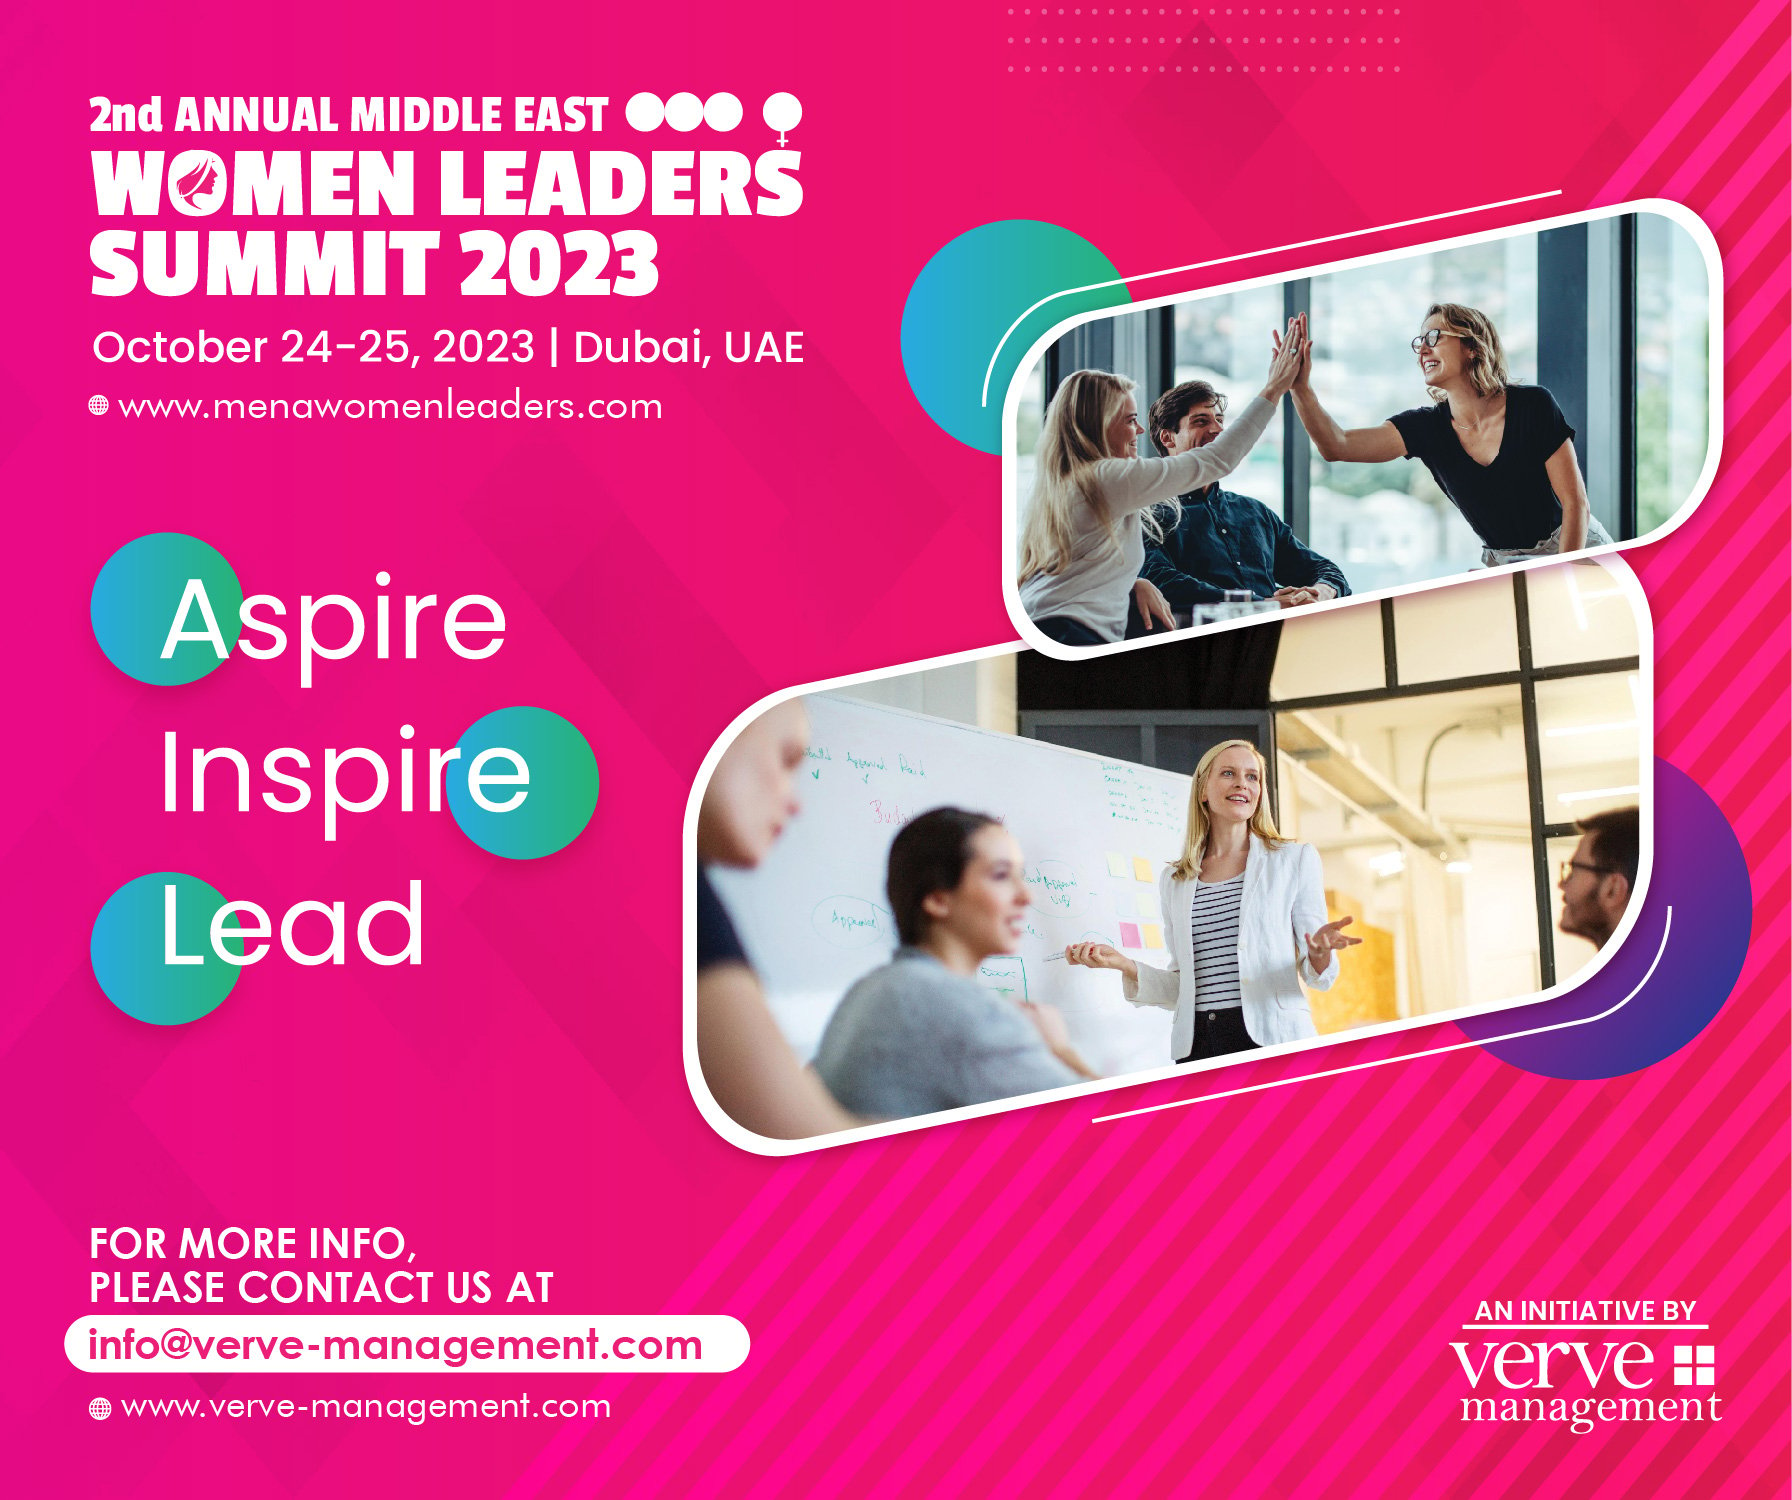 empowering-voices-2nd-annual-middle-east-women-leaders-summit-dubai-2023